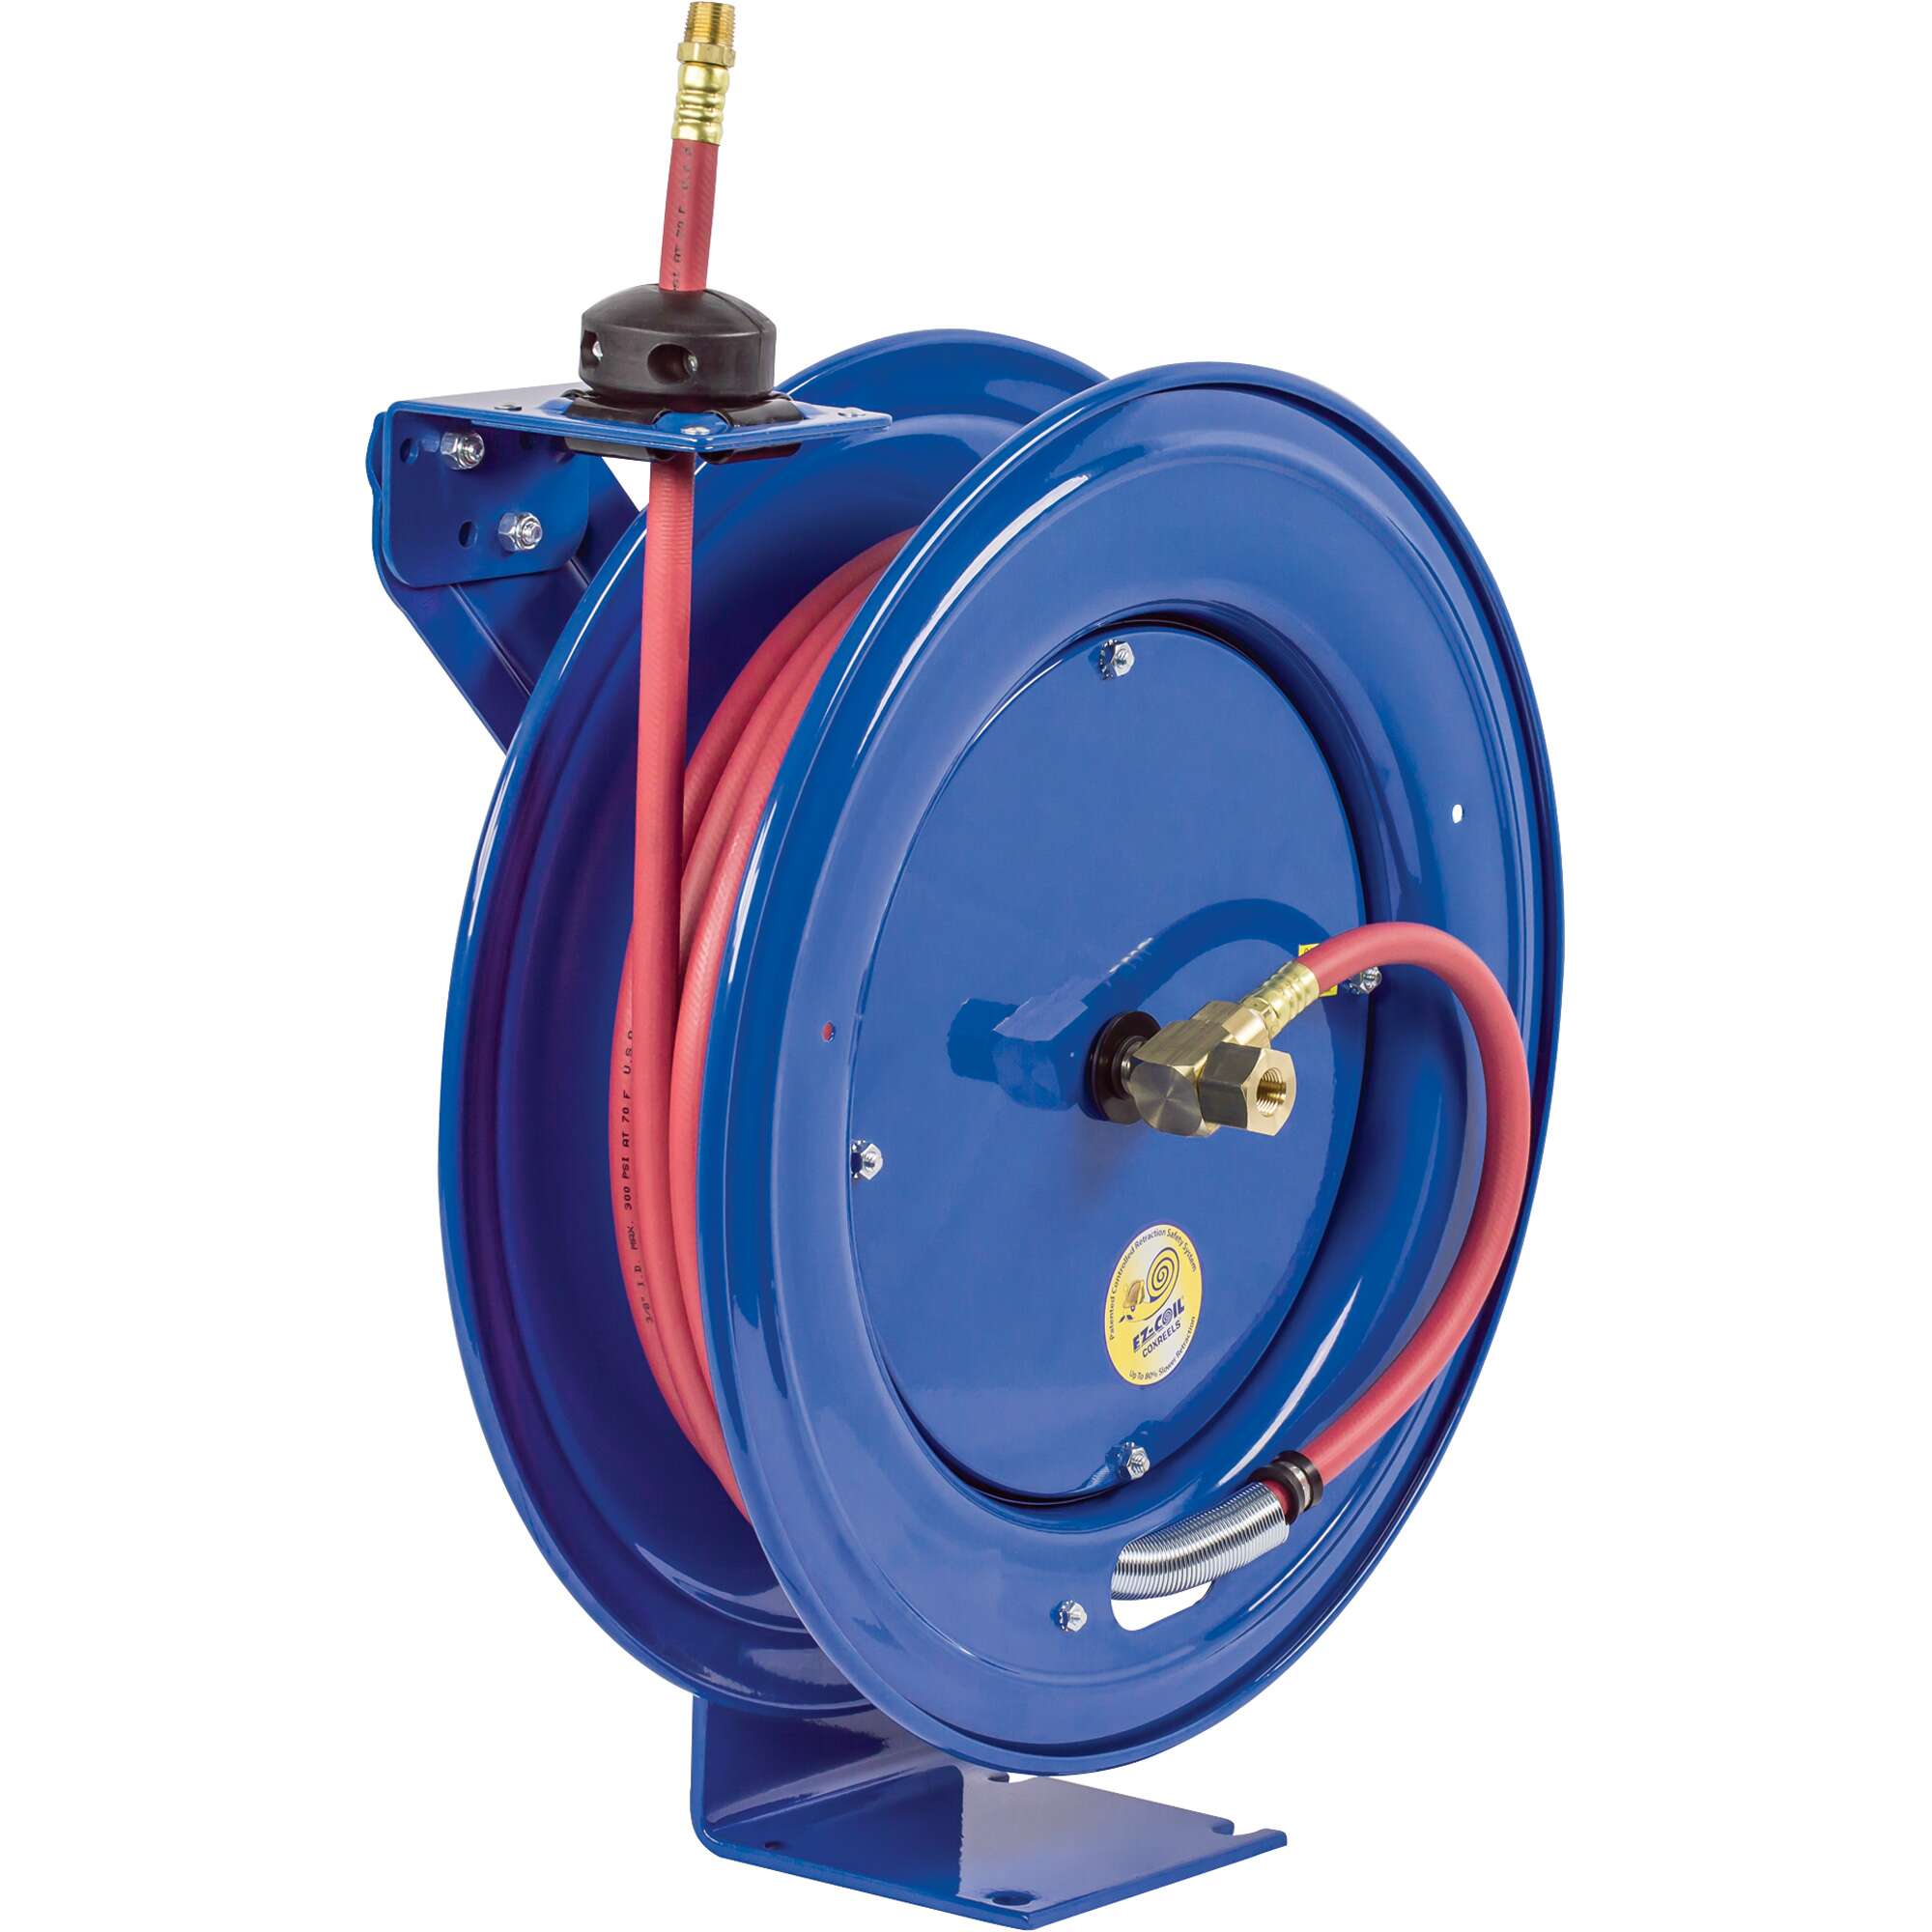 Coxreels Heavy Duty Safety Air Water Hose Reel With 3/8in x 75ft PVC Hose Max 300 PSI